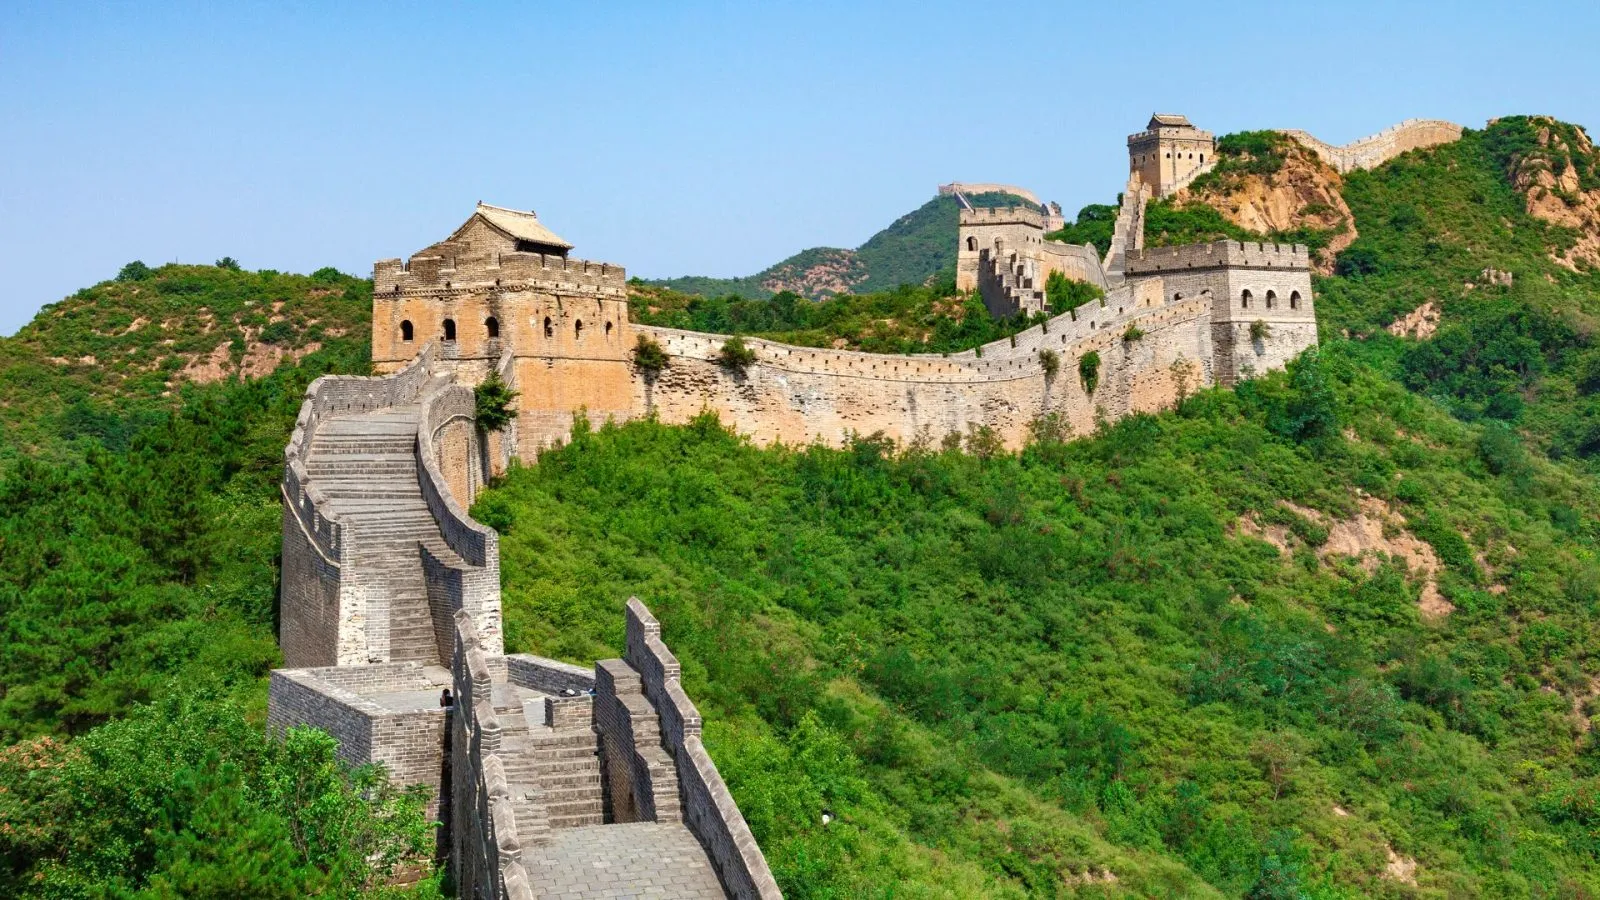 Great Wall Of China Wonder: Marvel At The Timeless Splendor And Historical Grandeur Of This Legendary Monument